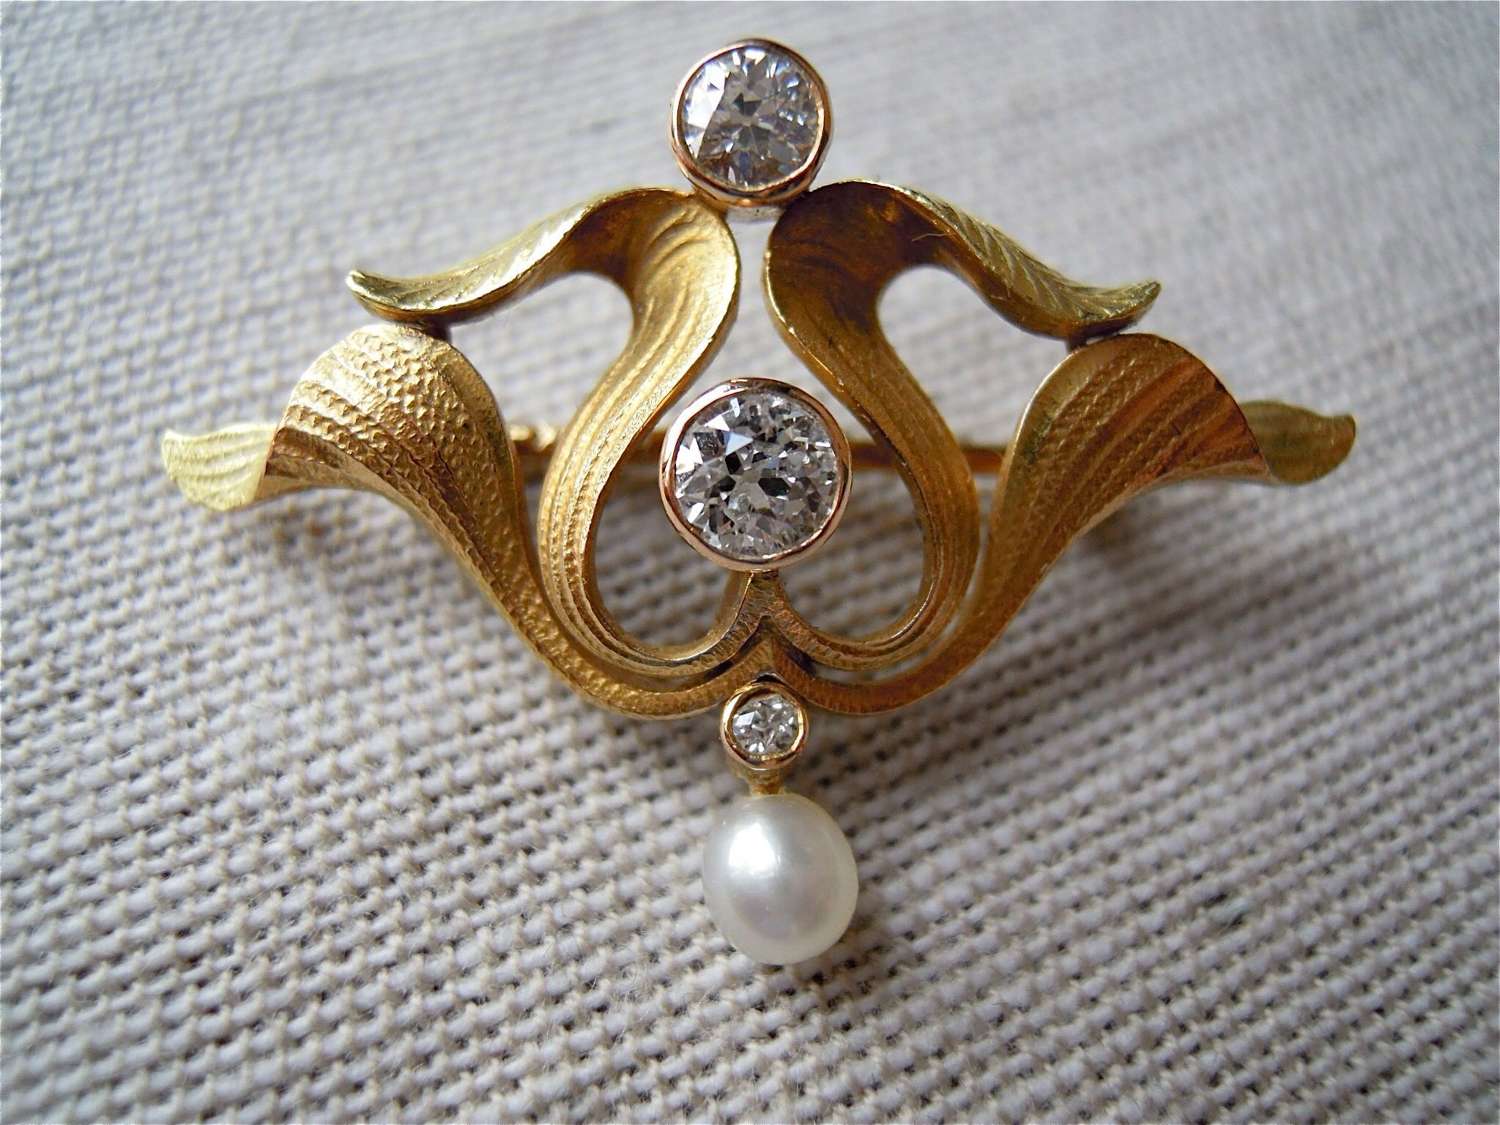 Antique 18ct gold and diamond brooch/pendant